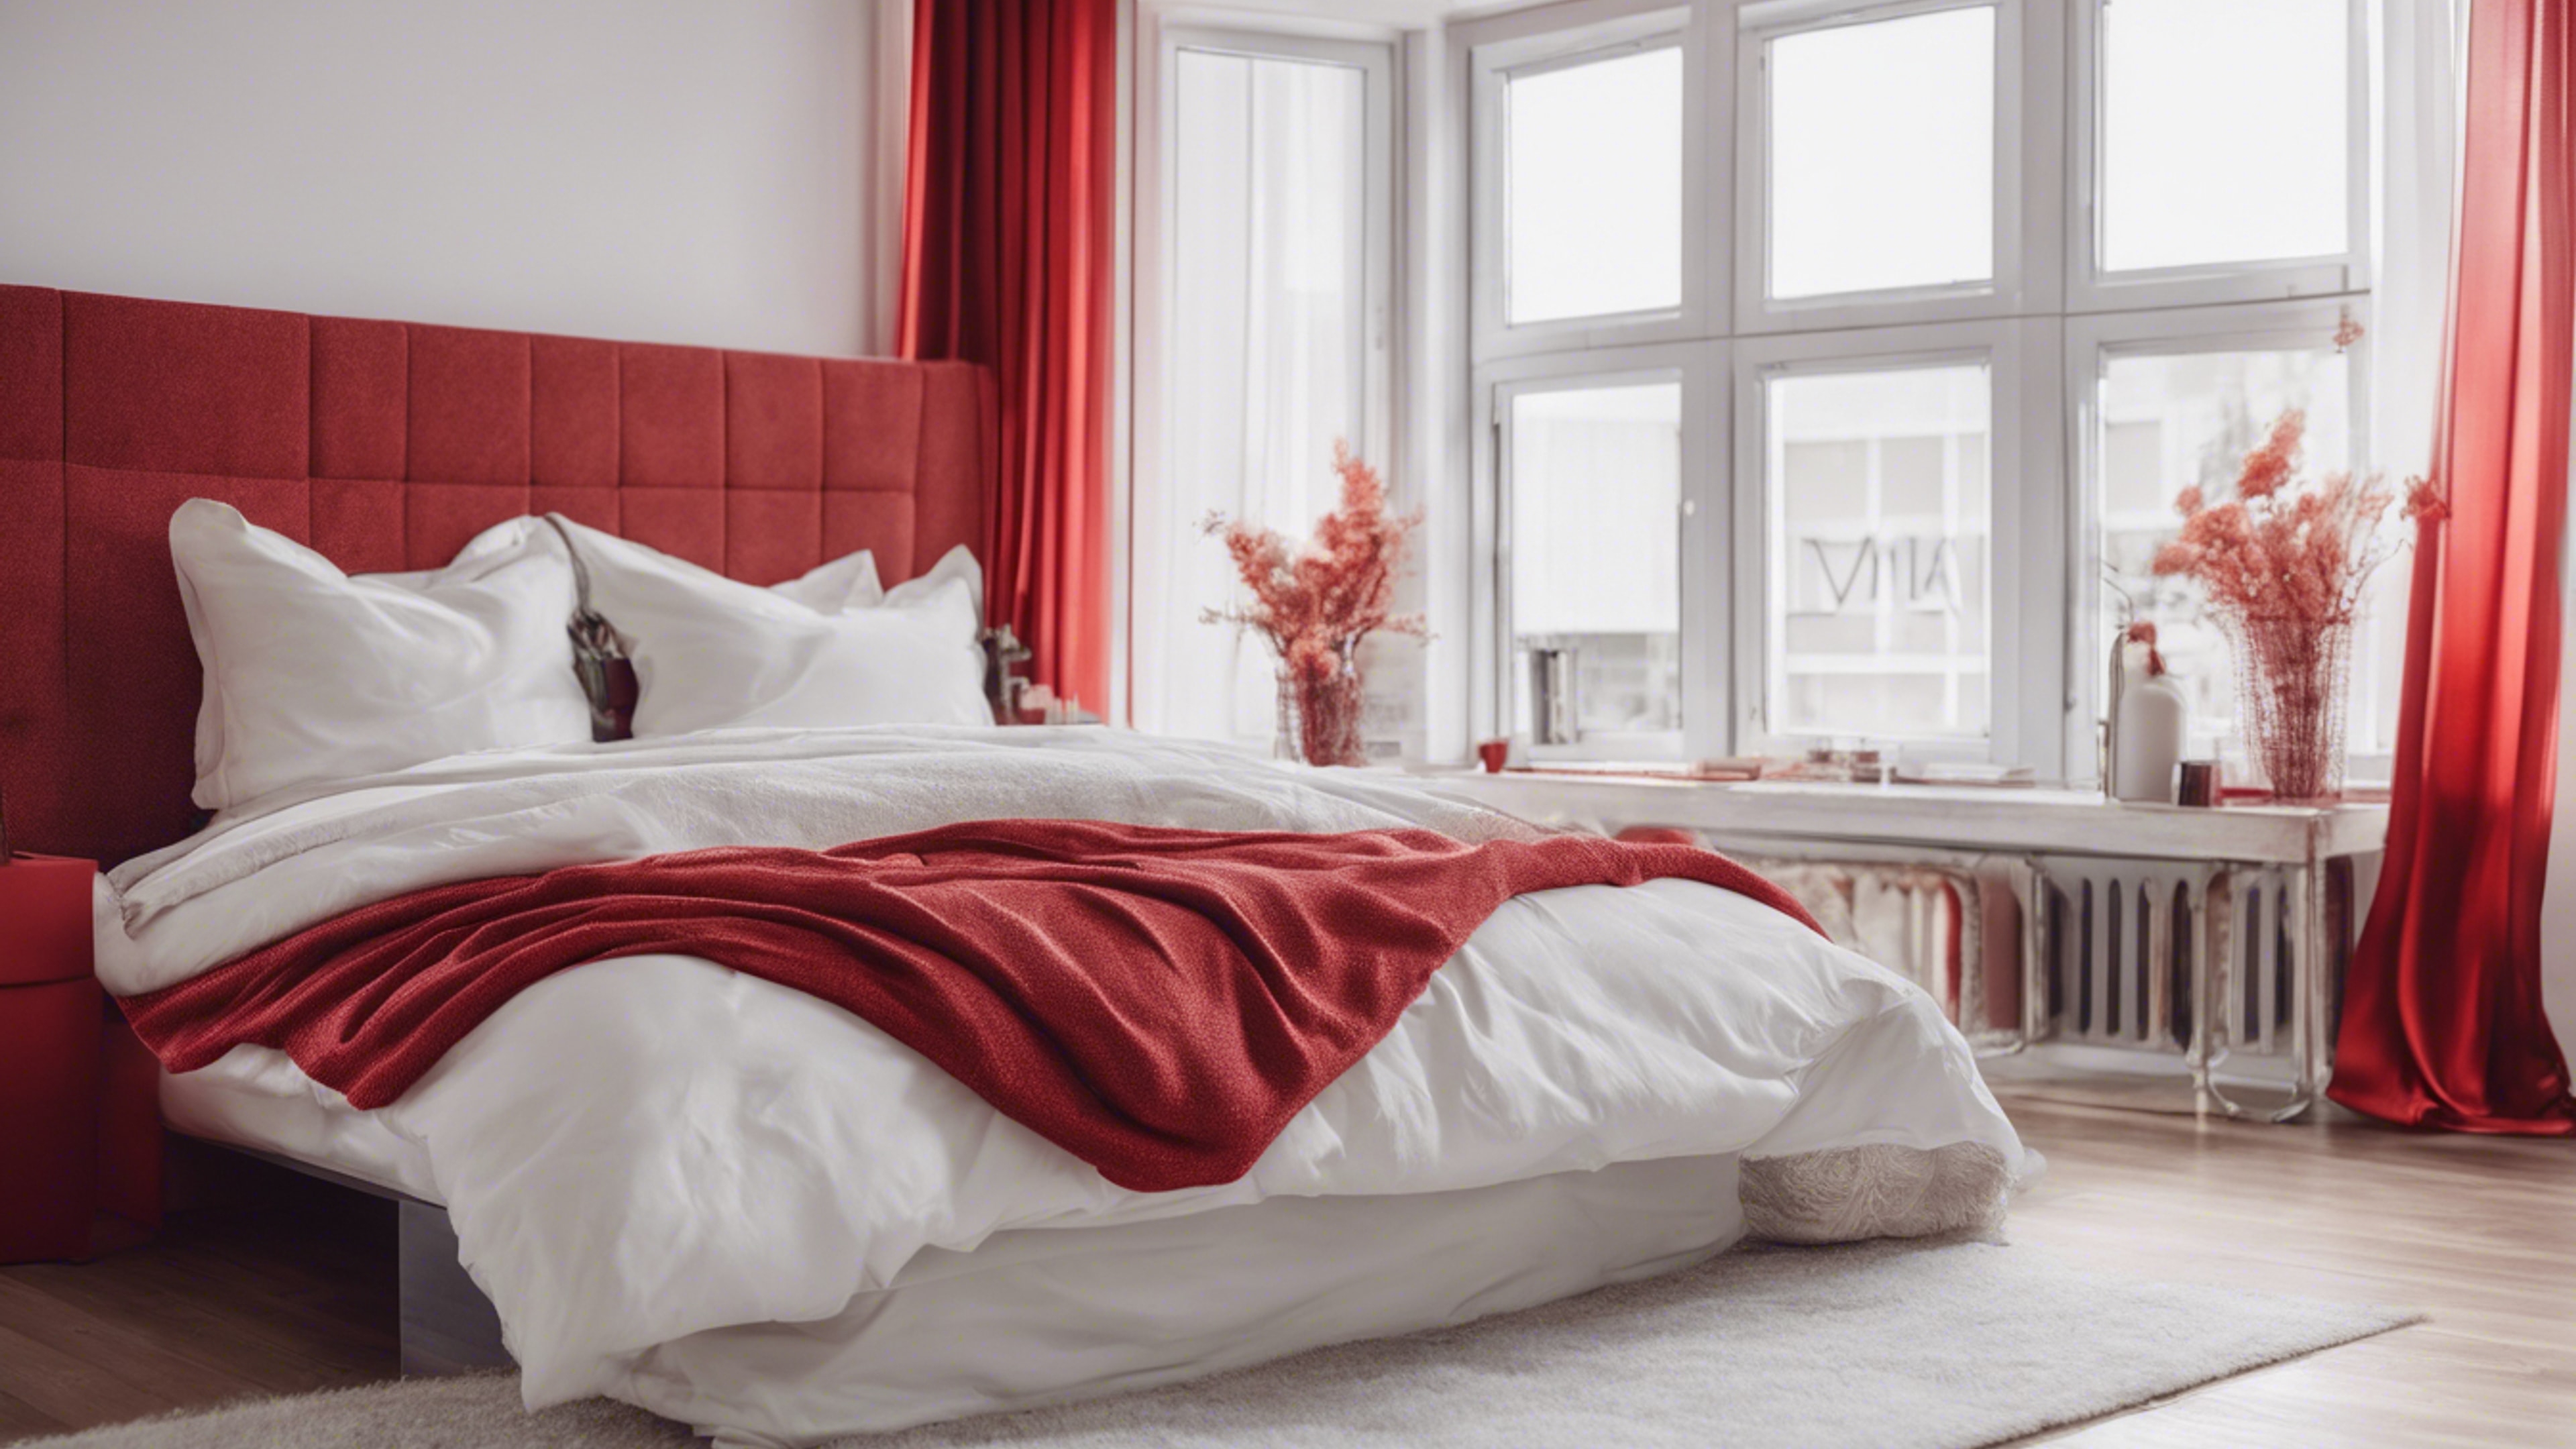 A contemporary bedroom decorated in minimalist red and white theme. Тапет[ba3f34033fa9429b9d31]